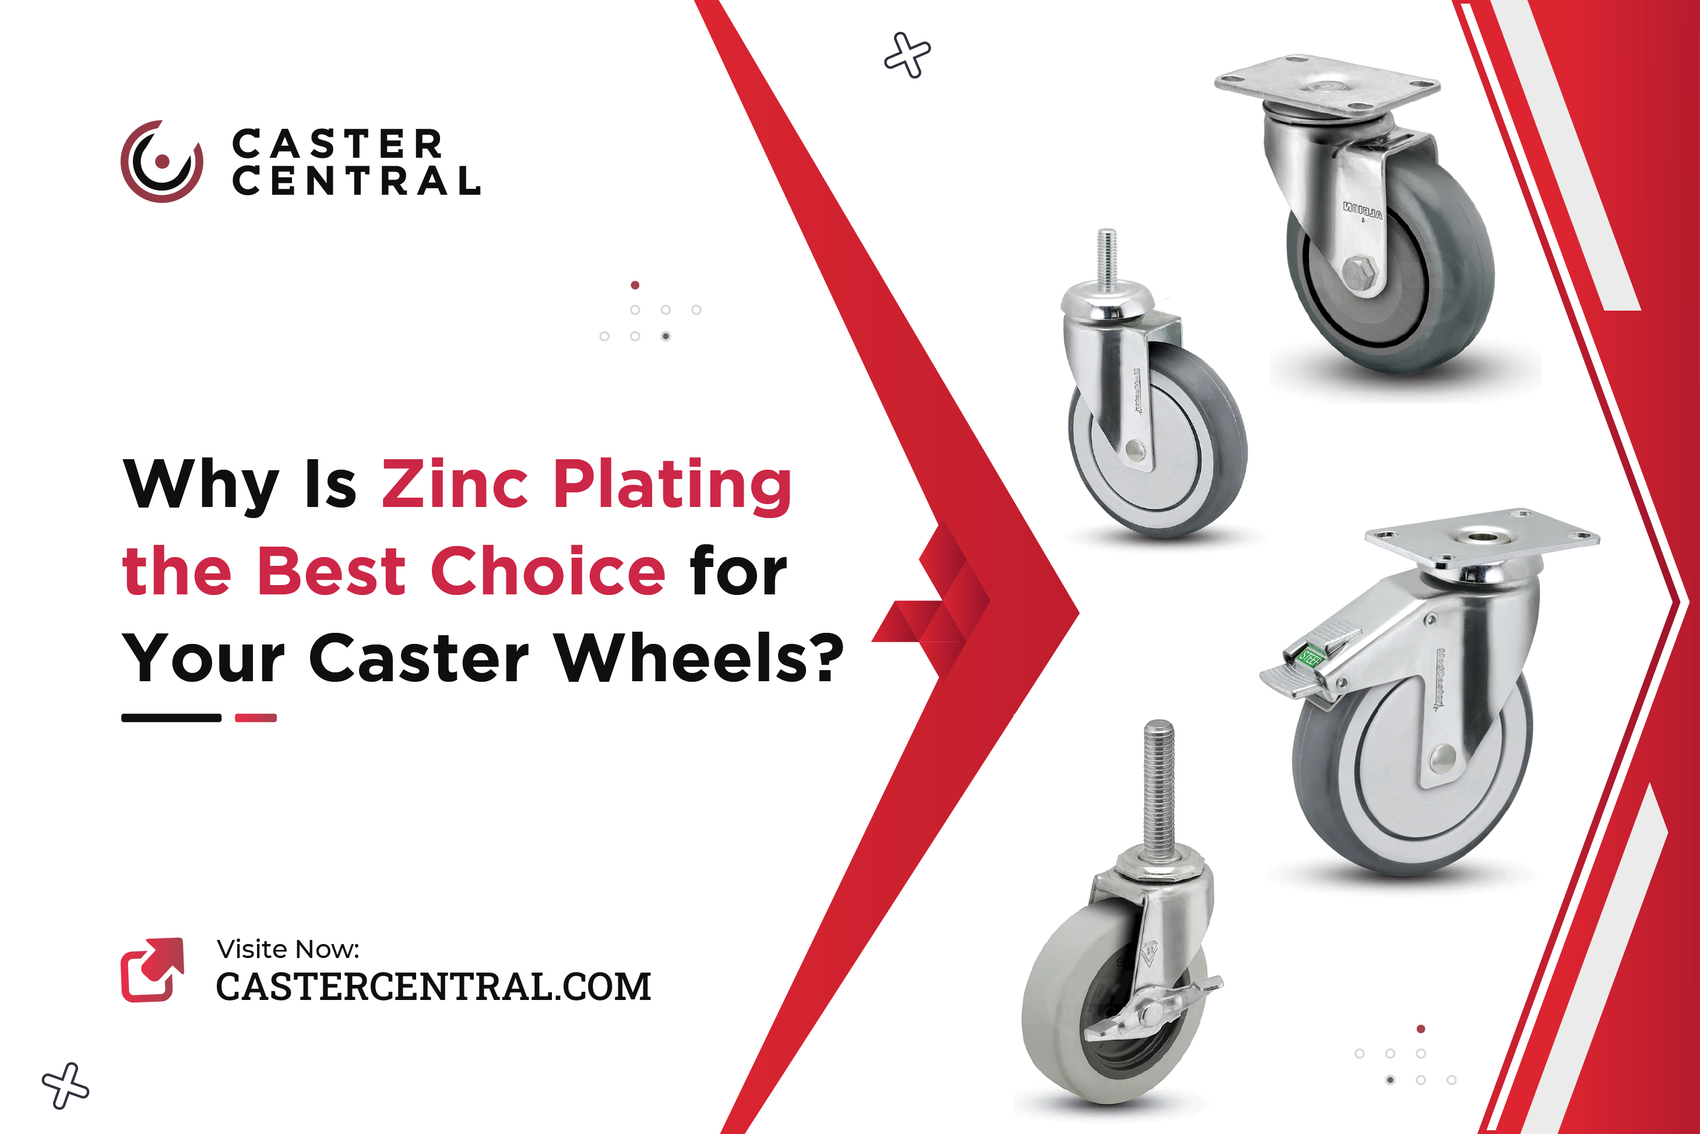 Why Is Zinc Plating the Best Choice for Your Caster Wheels?